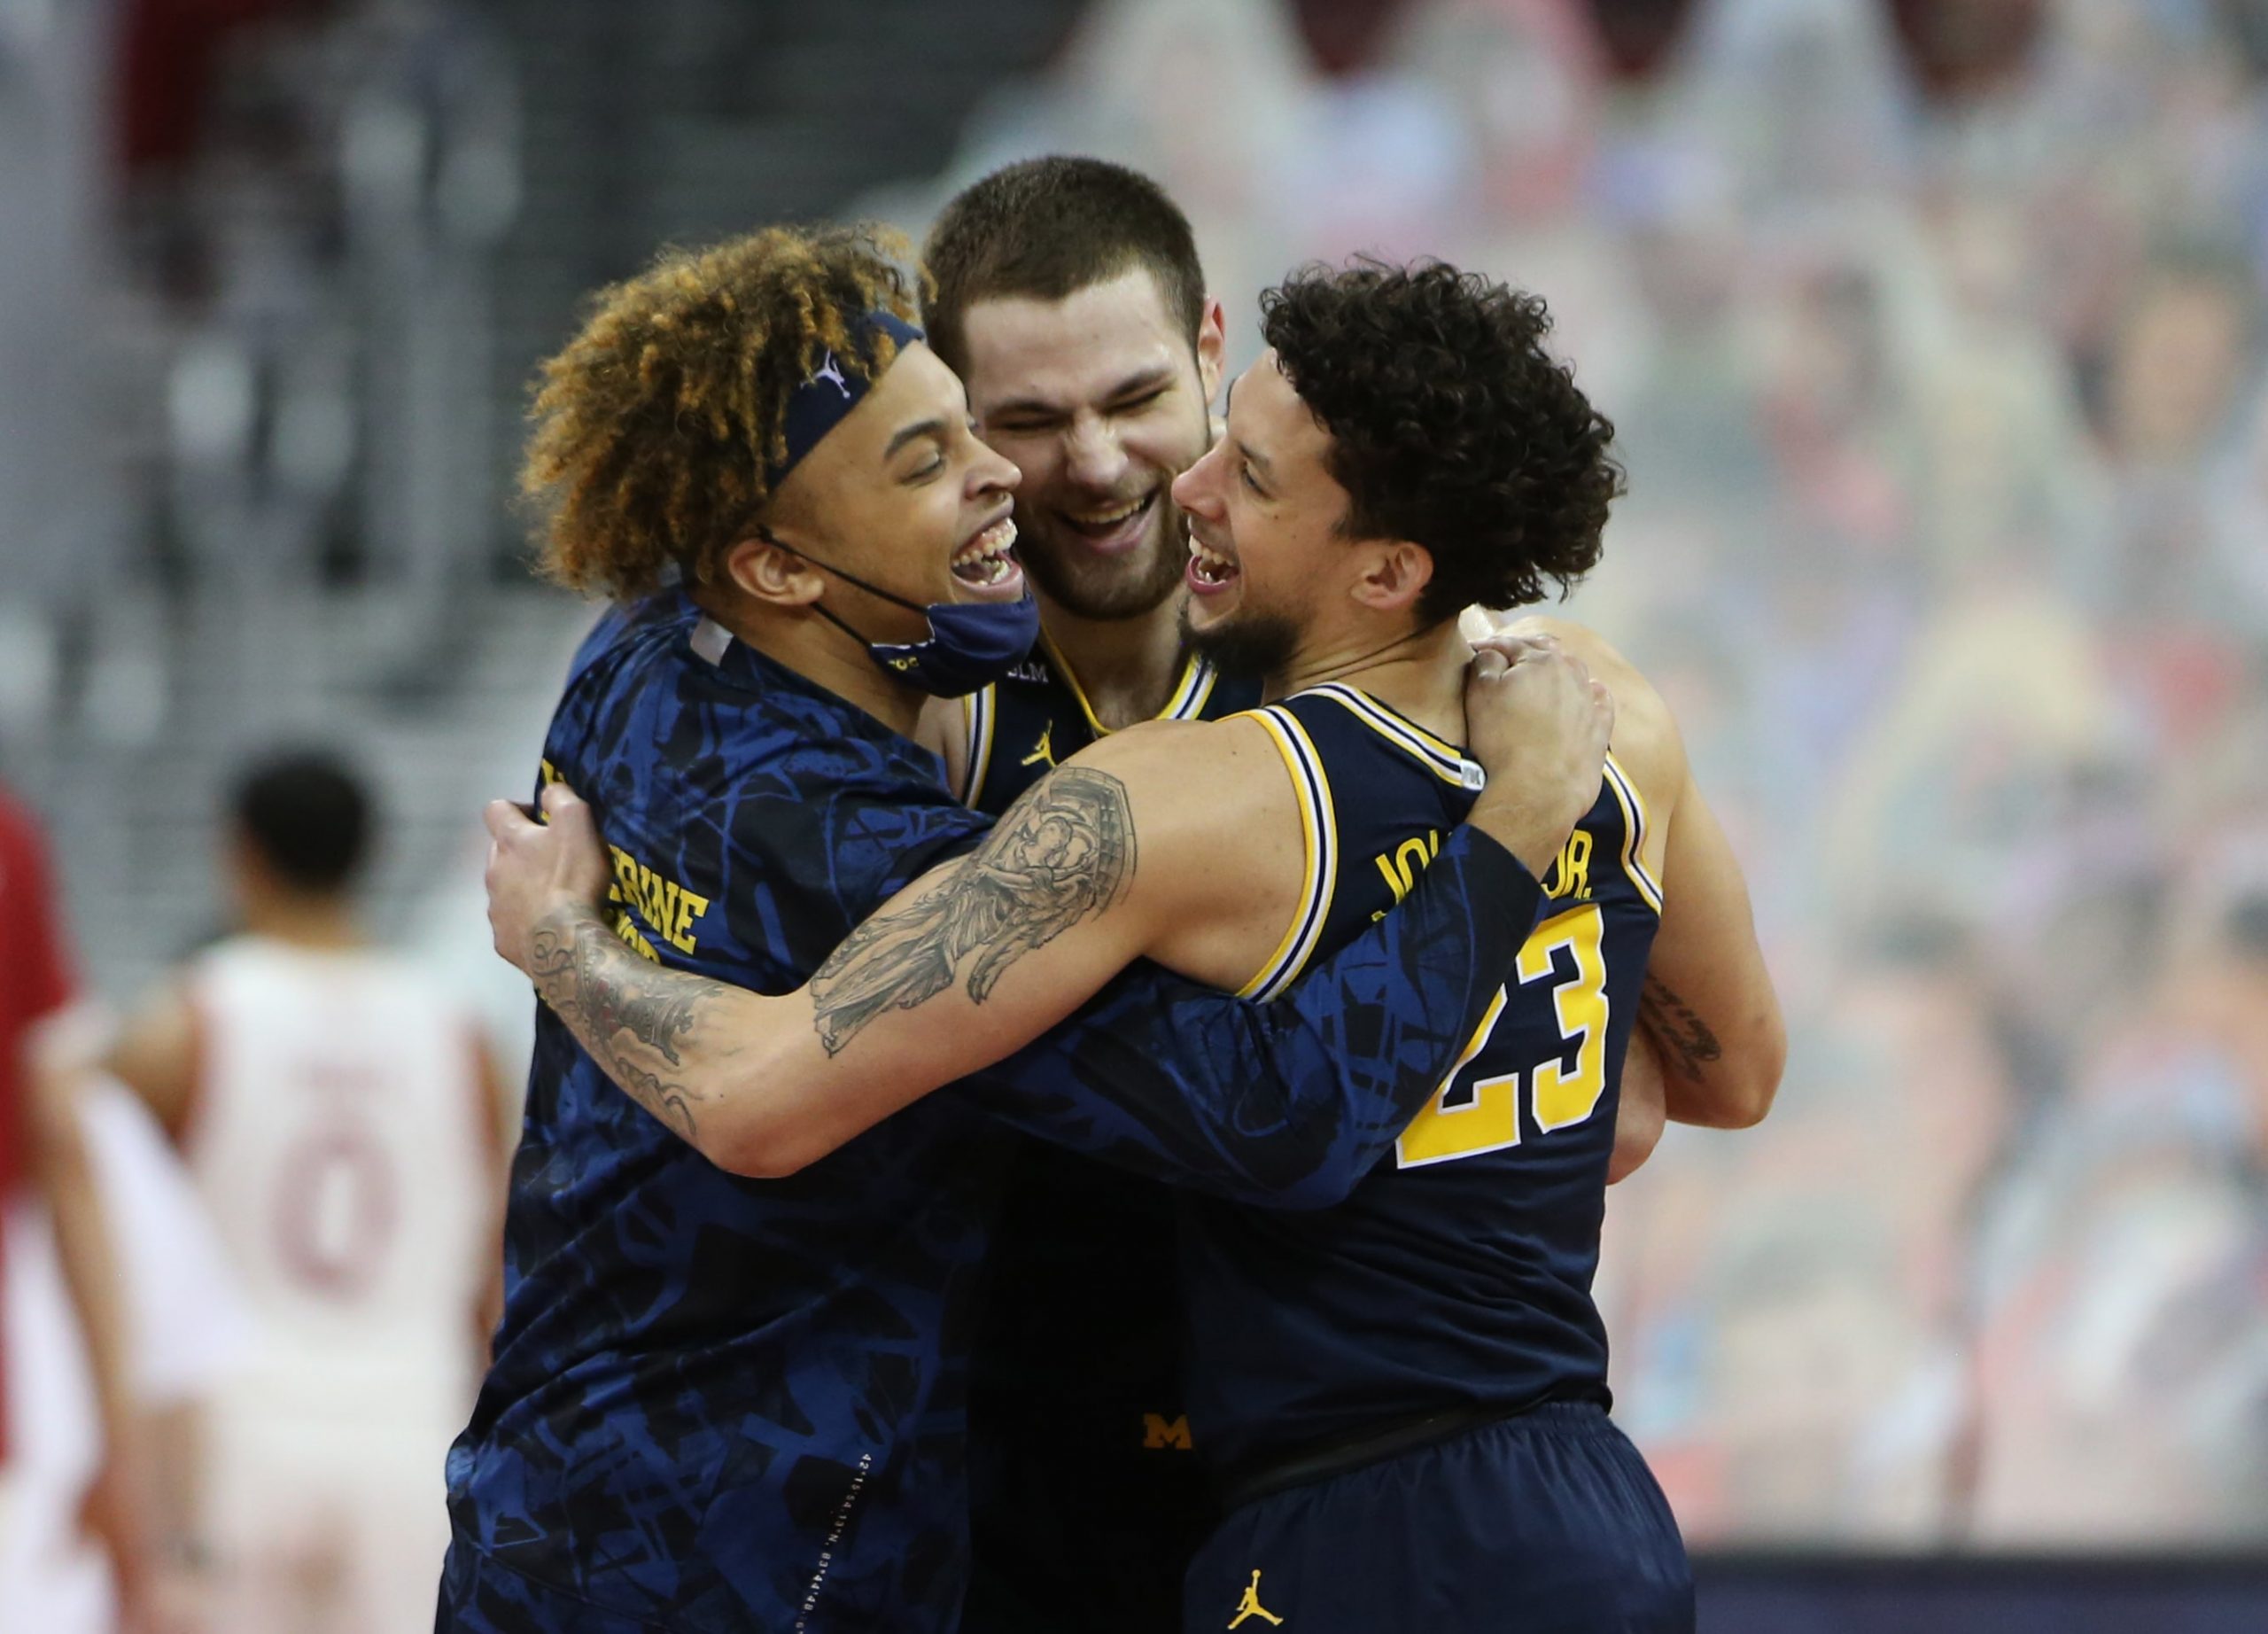 Michigan Wolverines players including Michigan Wolverines center Hunter Dickinson (center) and forward Brandon Johns Jr. (23) celebrate their win over the Wisconsin Badgers after the game at the Kohl Center